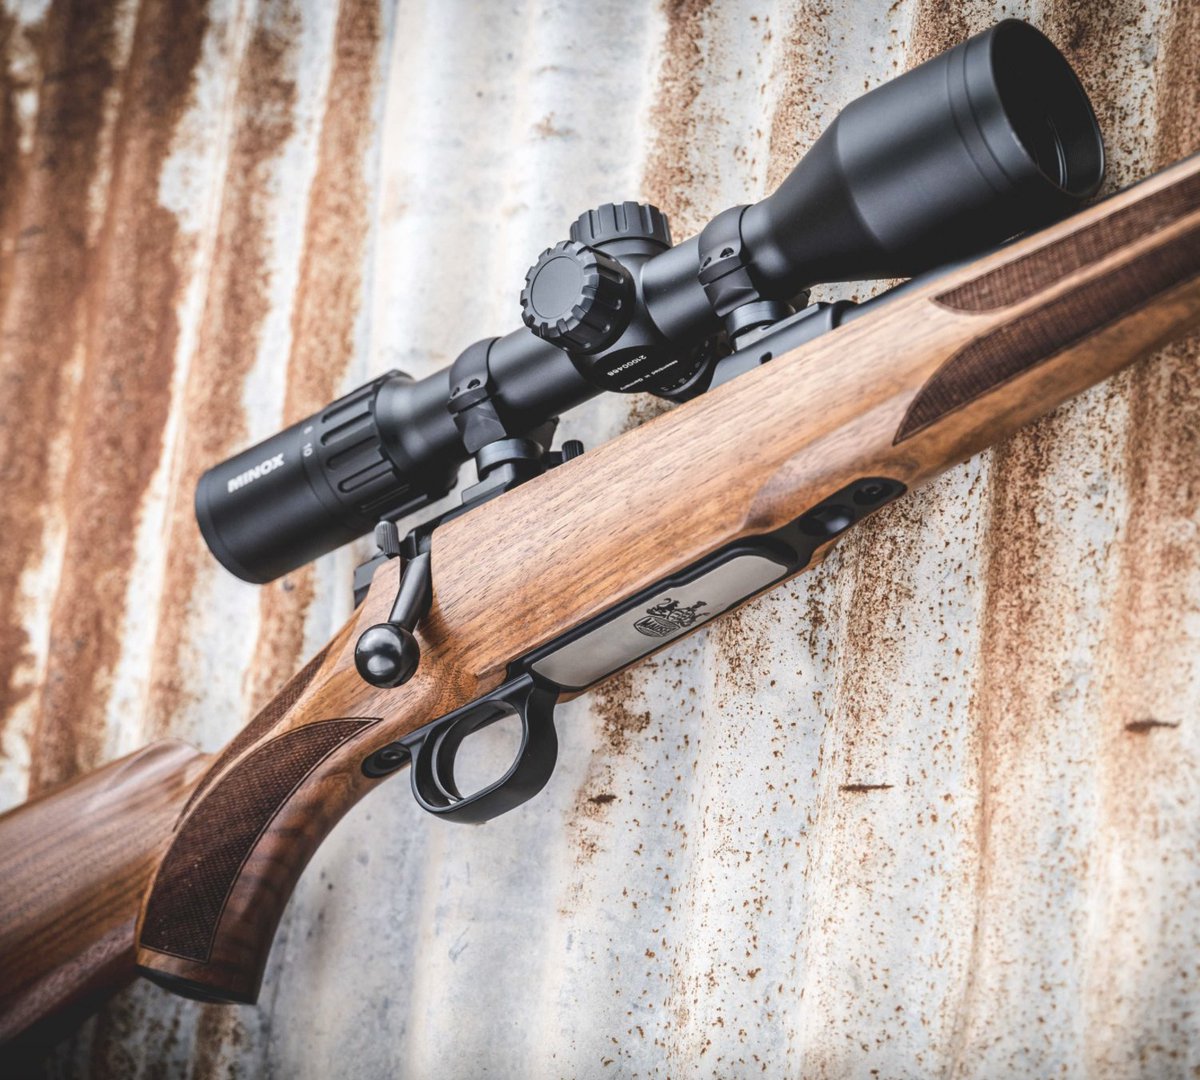 Today’s Mauser is not your Grandfather’s souvenir it’s stronger, lighter, more accurate and more reliable. It’s faster to load, to shoot, and to point.

#mauserrifles #mauserusa #mauser #huntingrifles #hunting #mauserm12